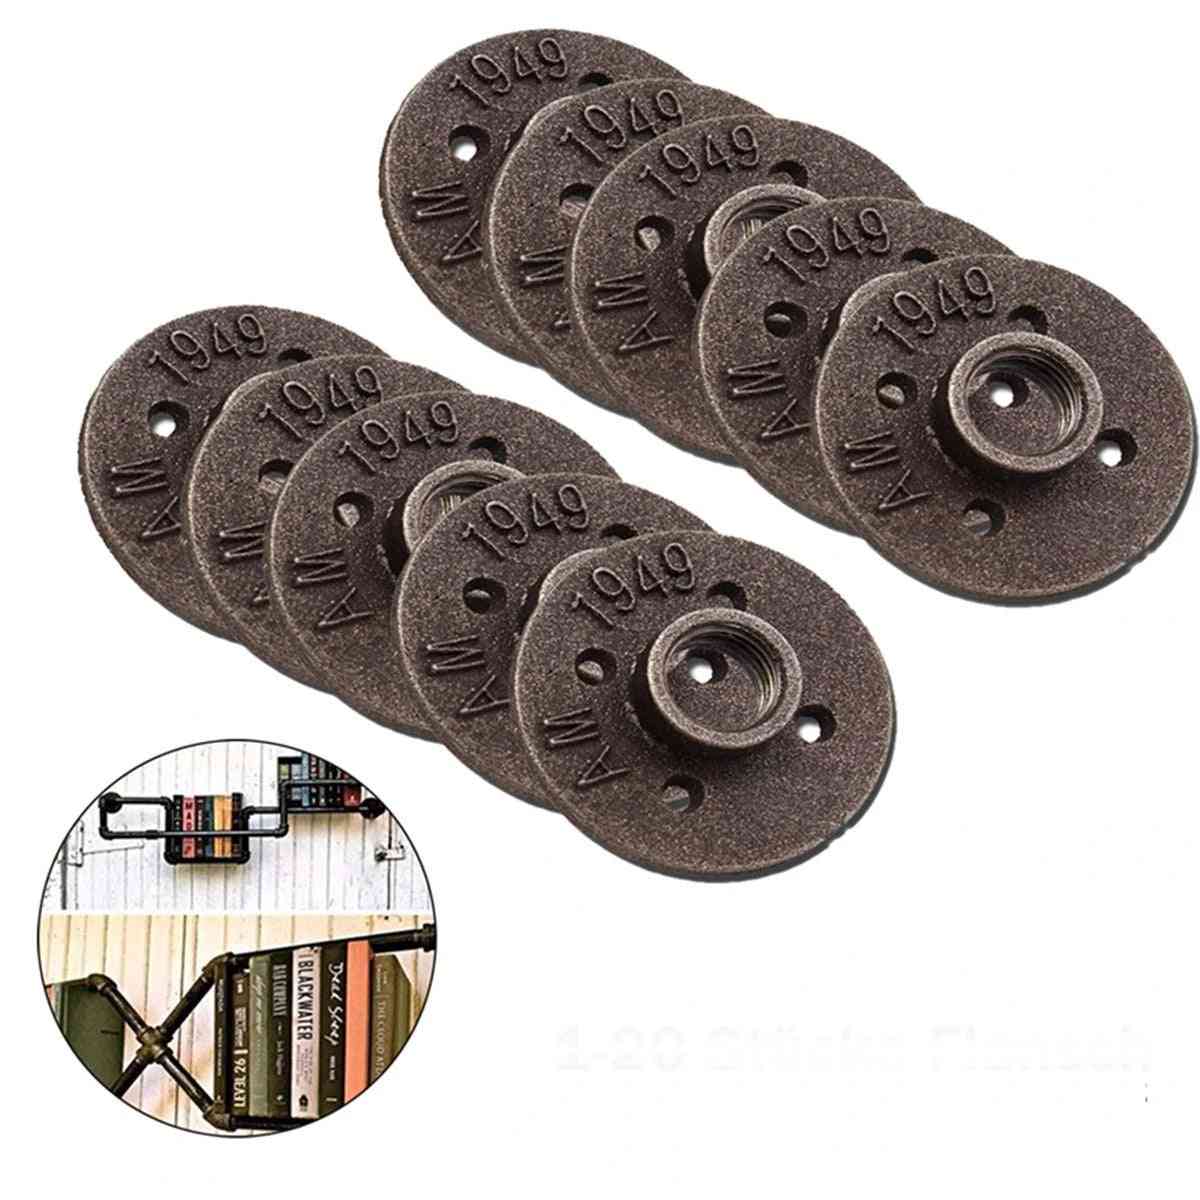 Flanges Iron Pipe Fittings Plumbing Wall Mount - Antique Piece Hardware Tool Cast Decorative